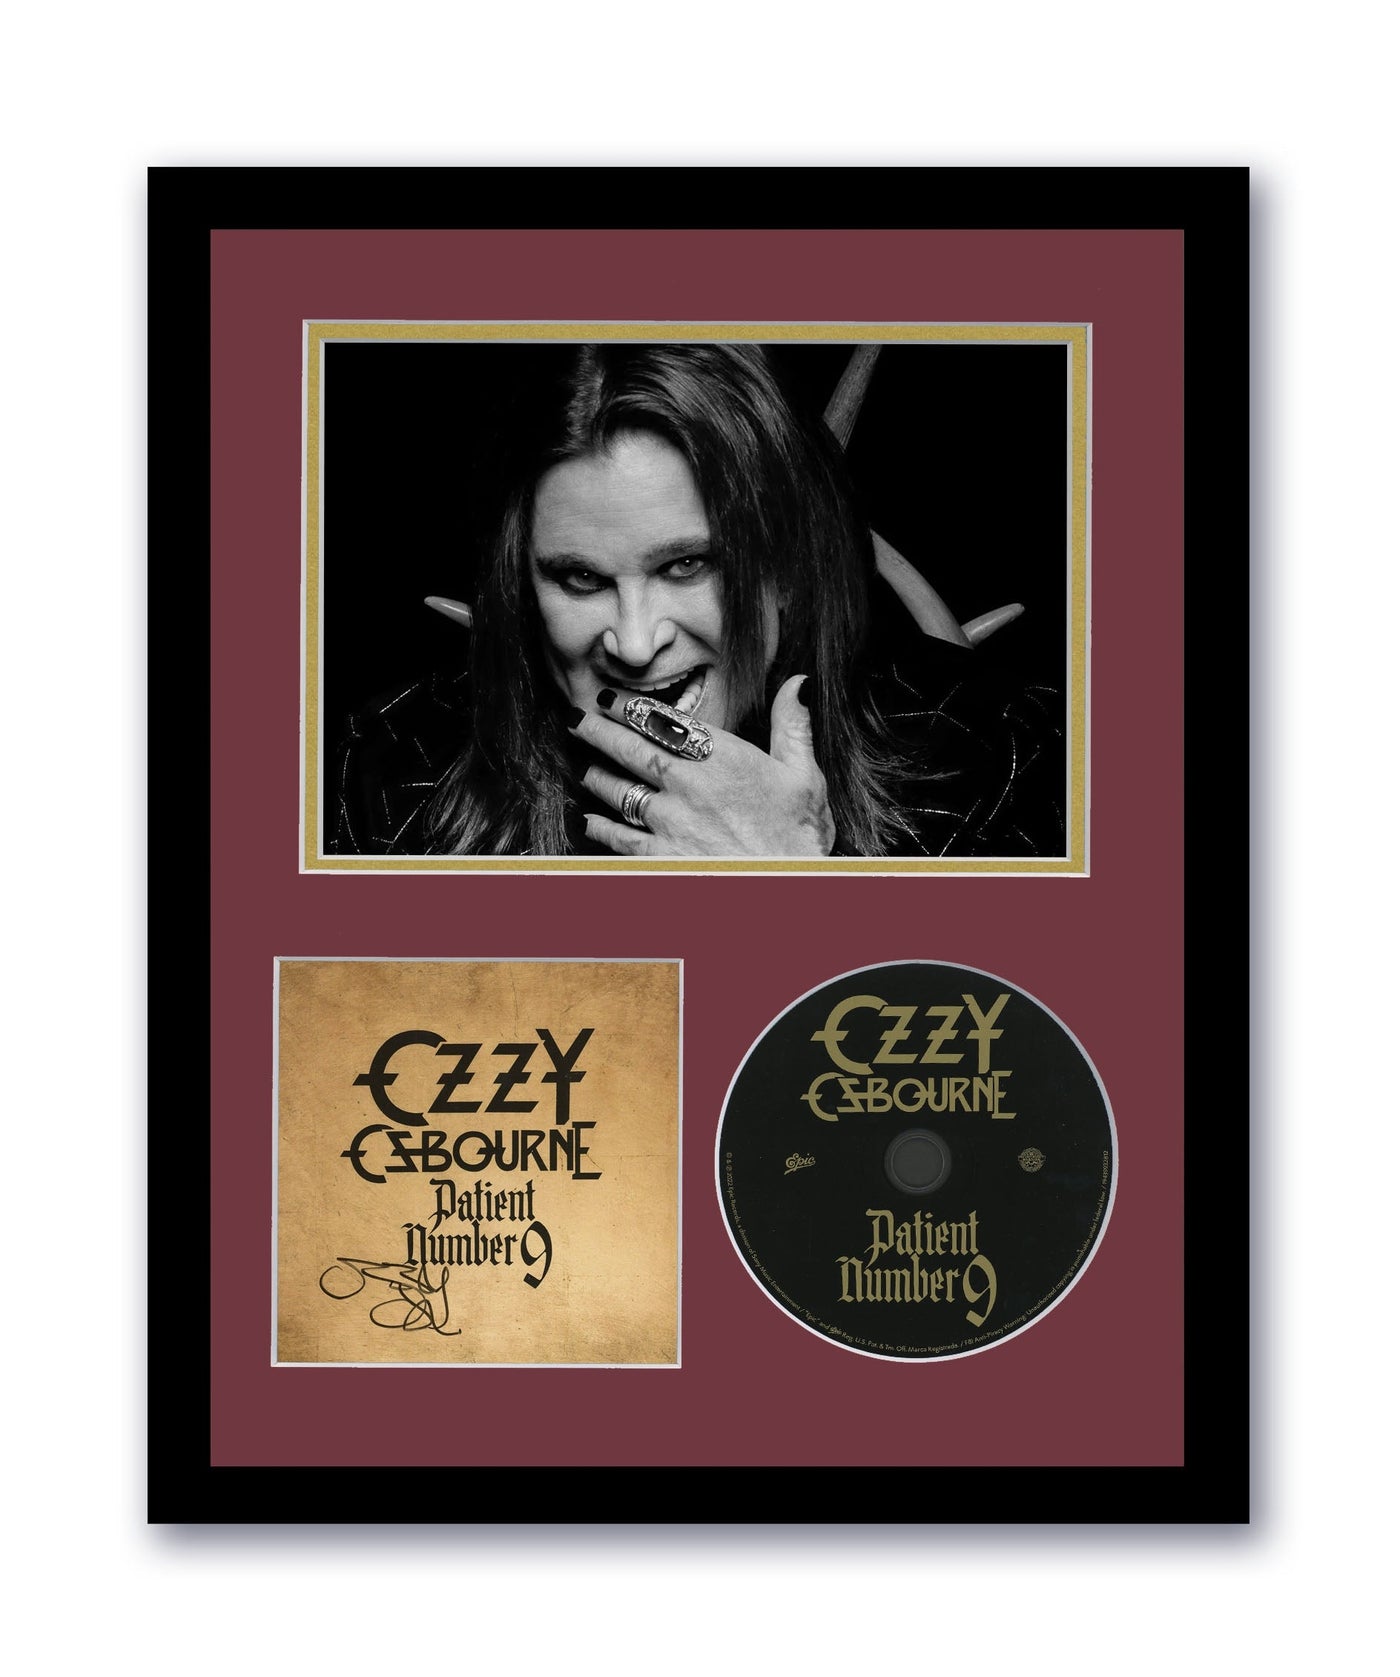 Ozzy Osbourne Autographed 11x14 Framed CD Photo Patient Number 9 ACOA 3